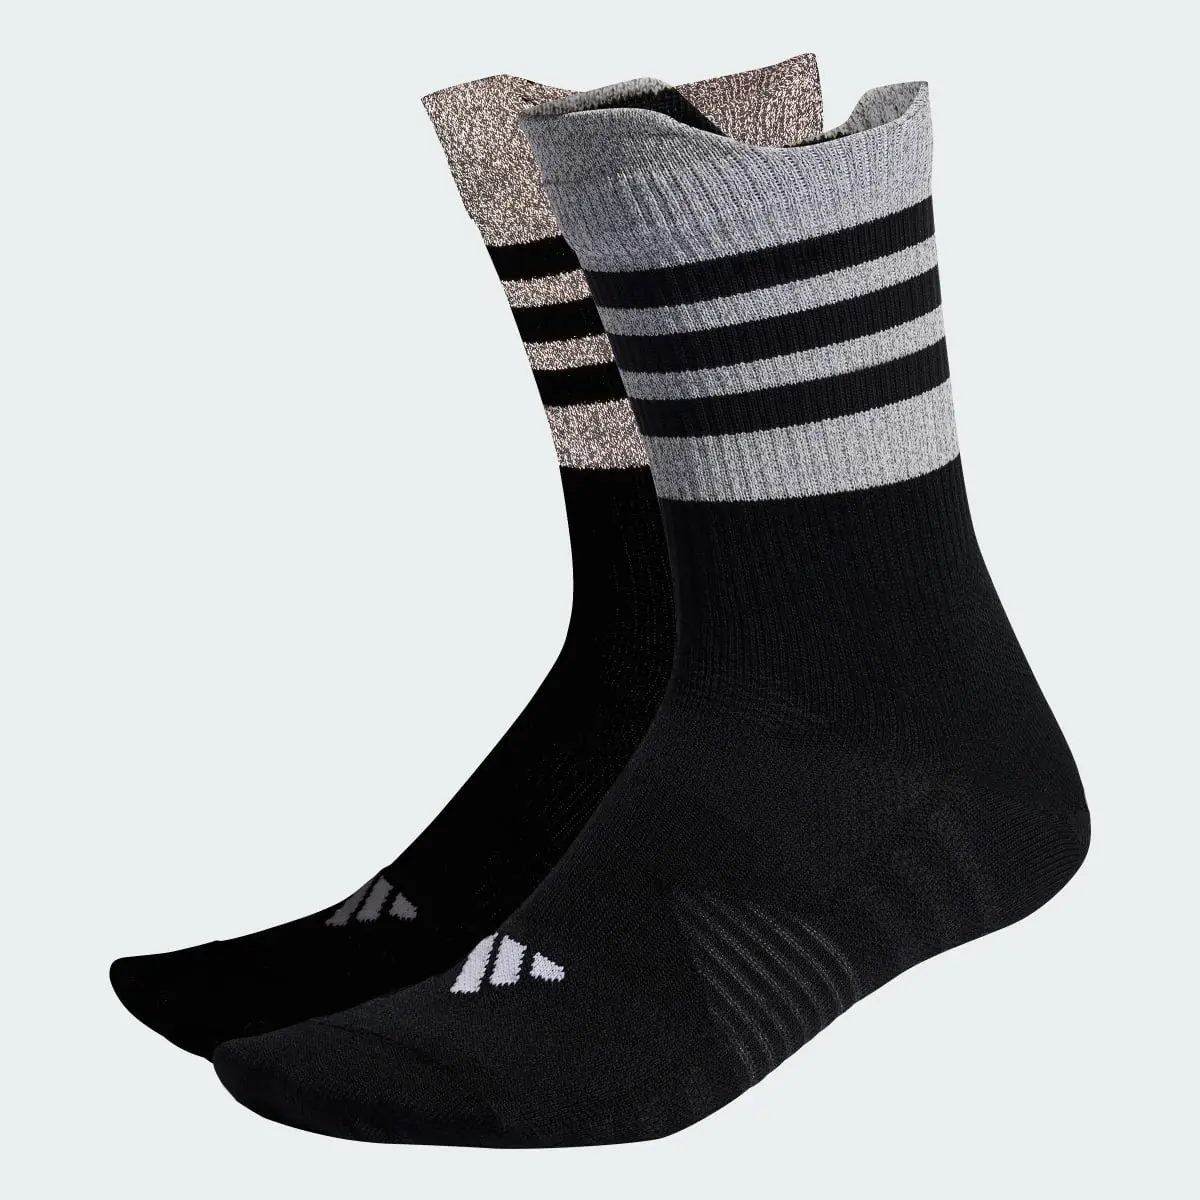 Adidas Chaussettes Running x Reflective (1 paire). 1